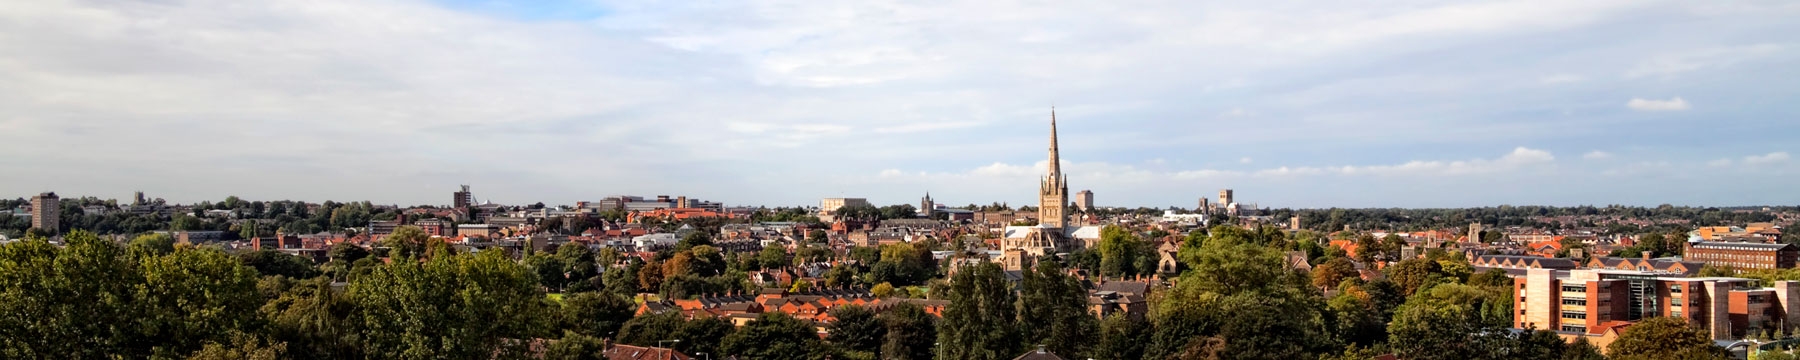 Great views of Norwich Cathedral and the surrounding city